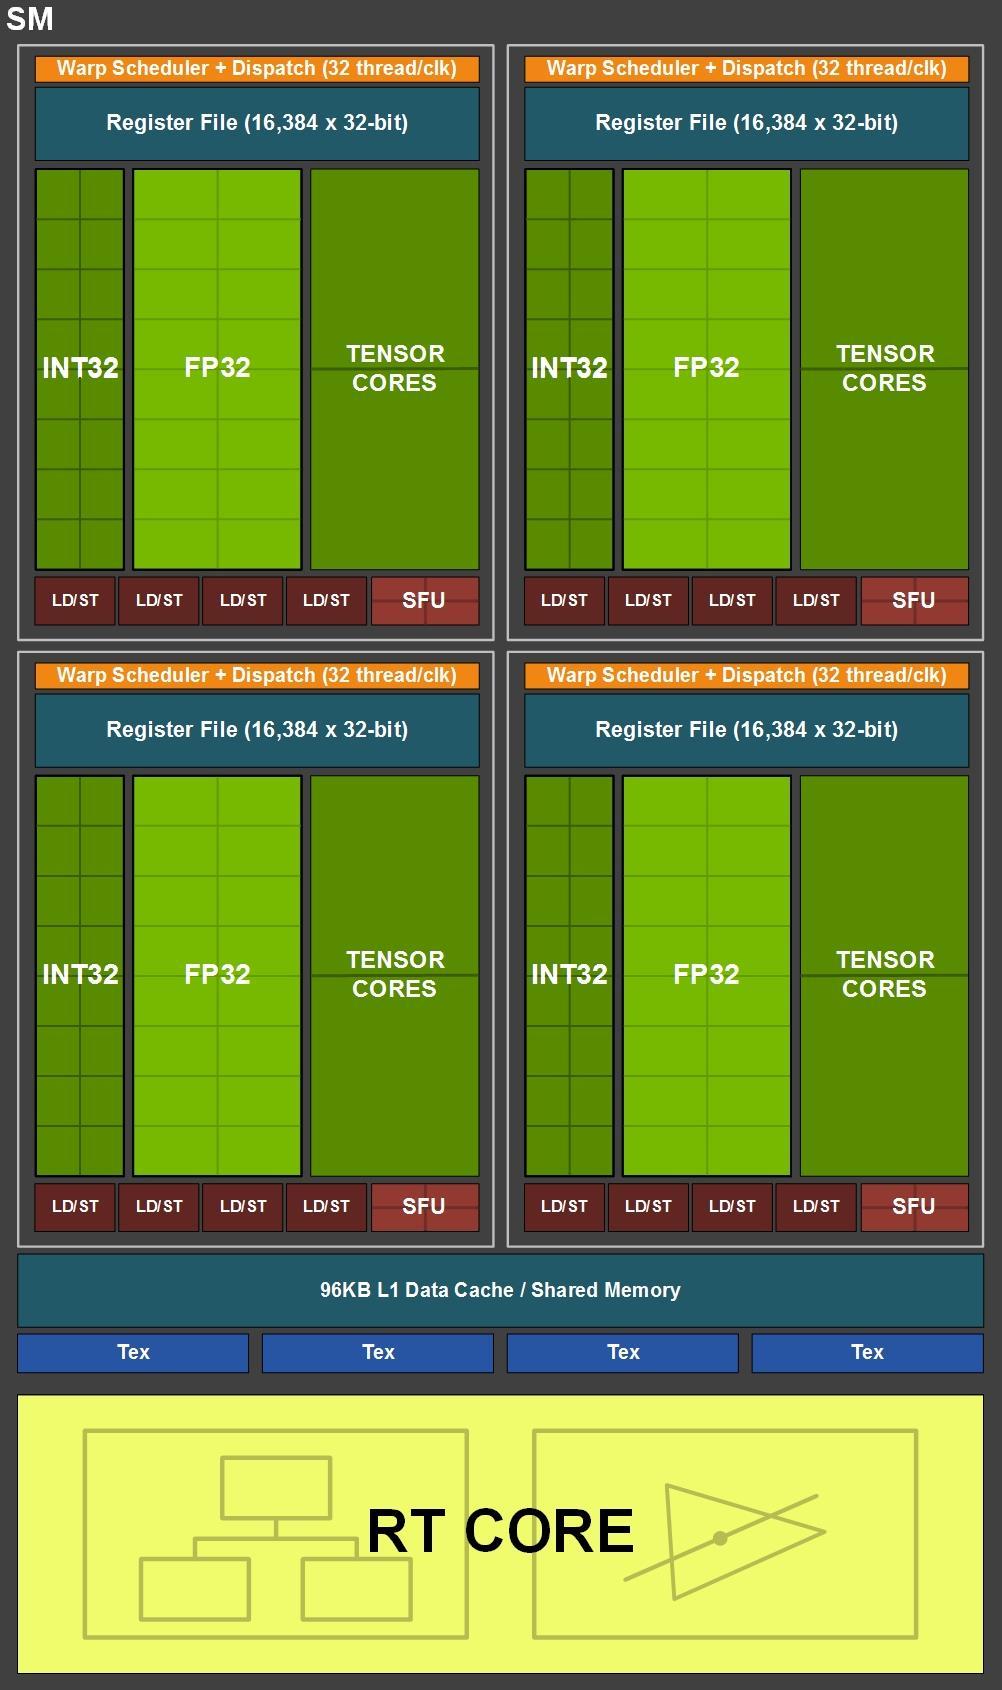 Turing Revolutionizes Graphics Quadro RTX 8000 4,608 CUDA Cores 576 Tensor Cores 72 RT Cores 48 GB GDDR6 Memory 130 TFLOPS FP16 260 TOPS INT8 520 TOPS INT4 336 GB/s DRAM BW 250 GB/s NVLINK Channels